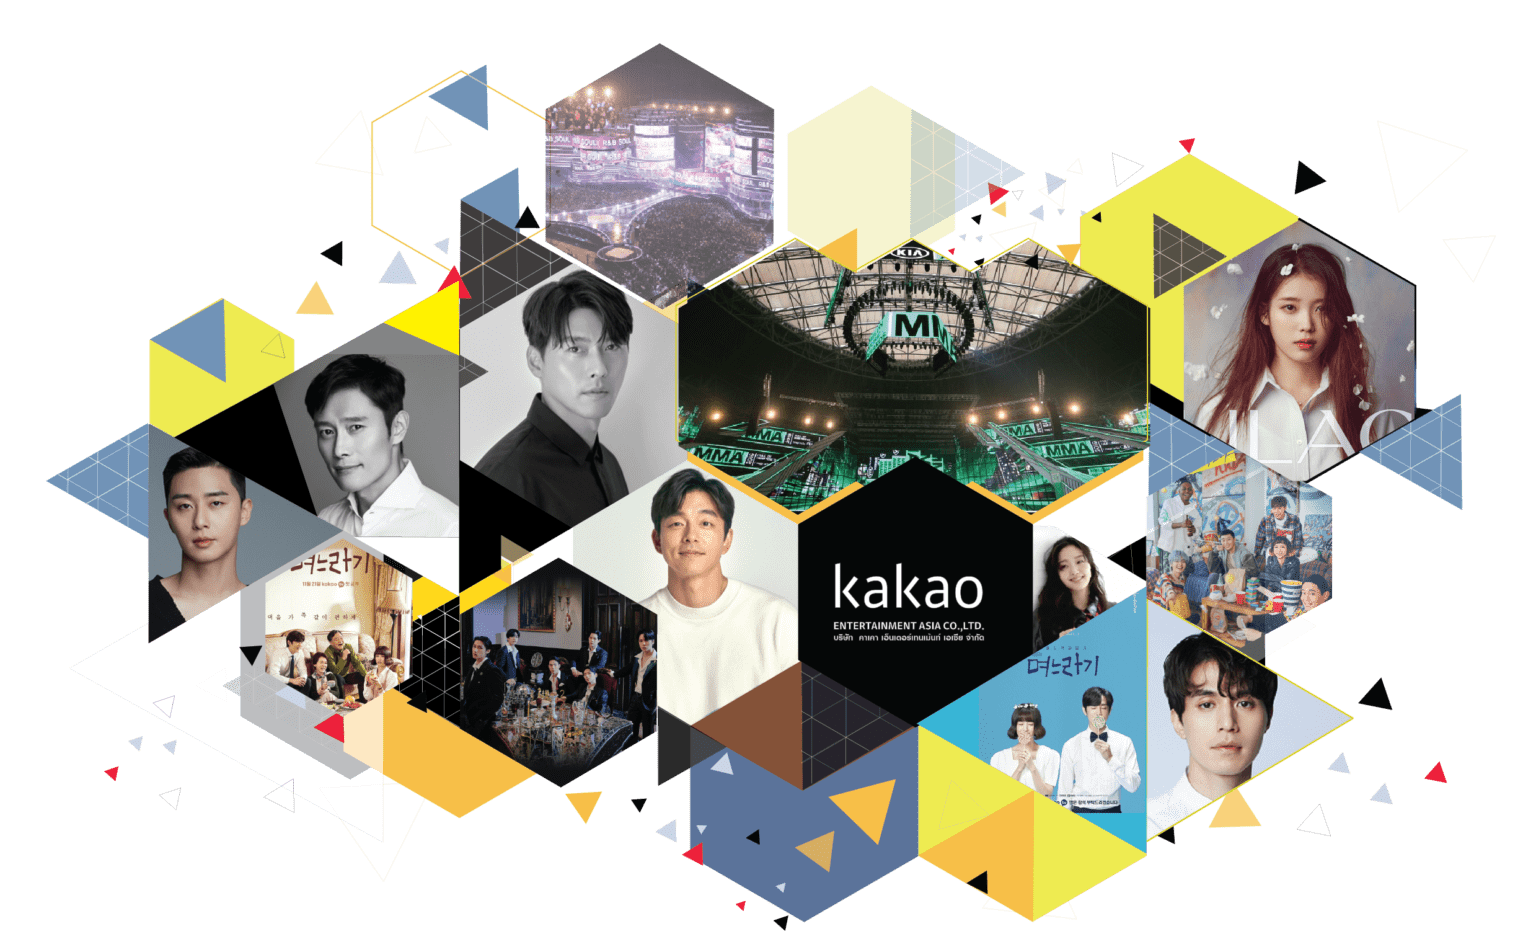 GIC, Saudi wealth fund to invest $785m in South Korea's Kakao Entertainment: report